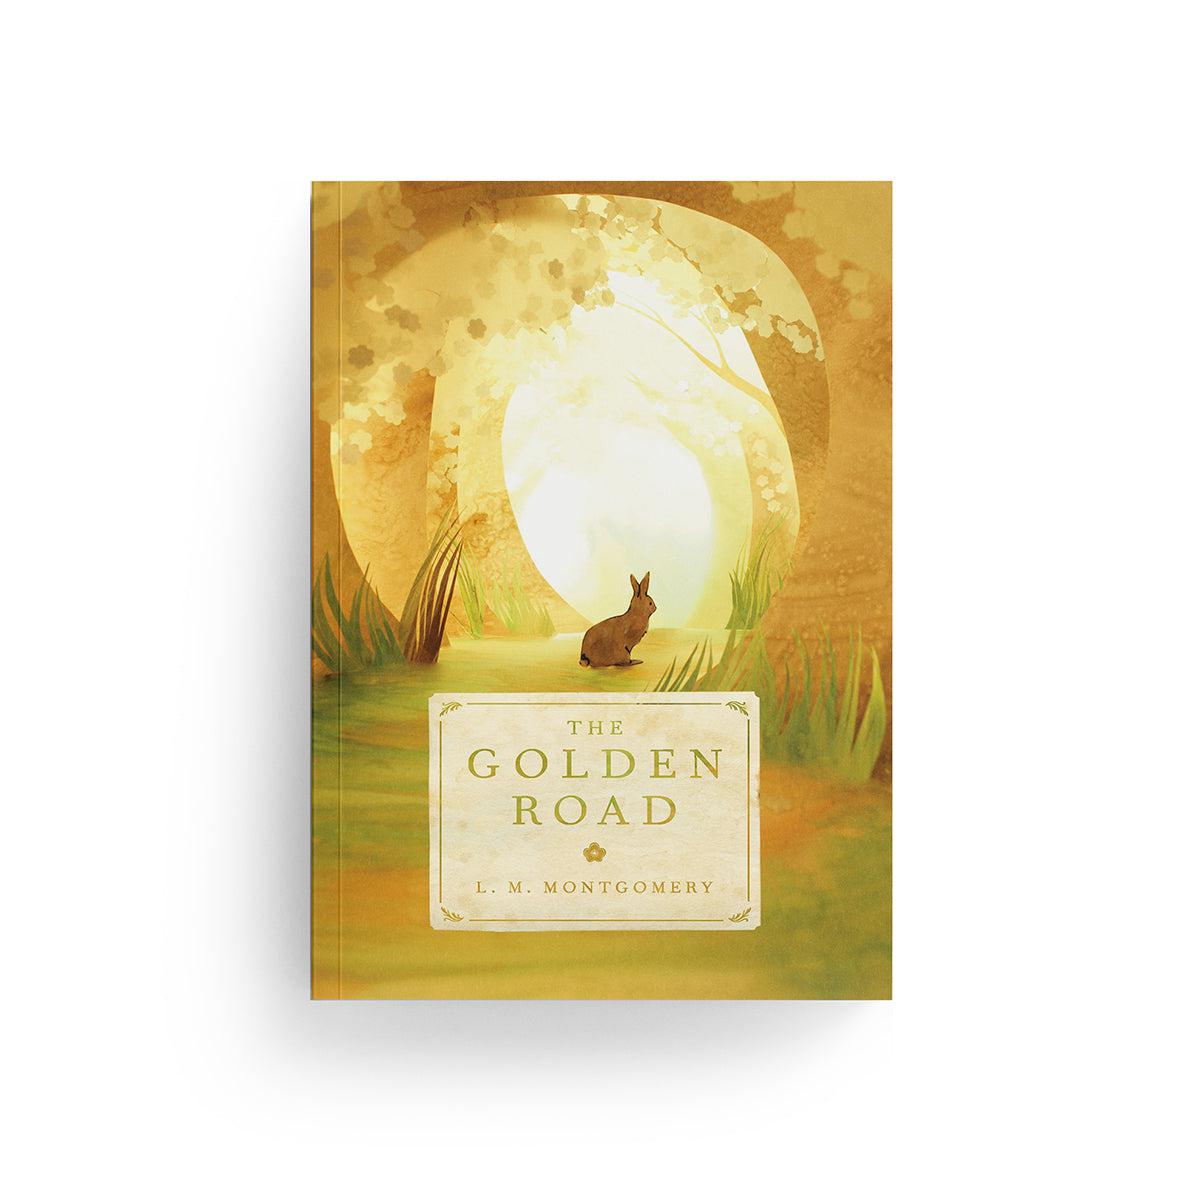 "The Golden Road" By L.M. Montgomery